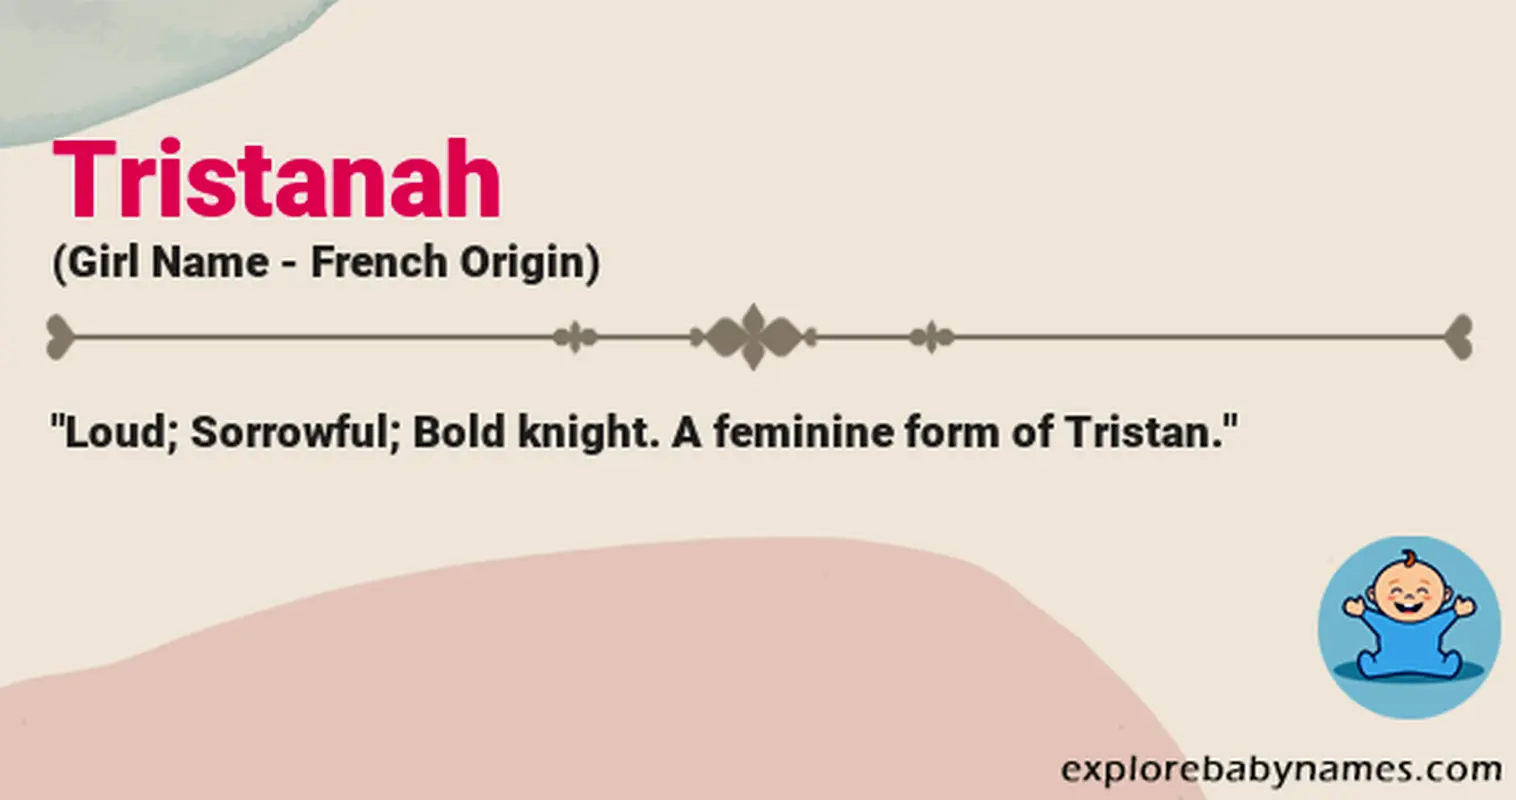 Meaning of Tristanah